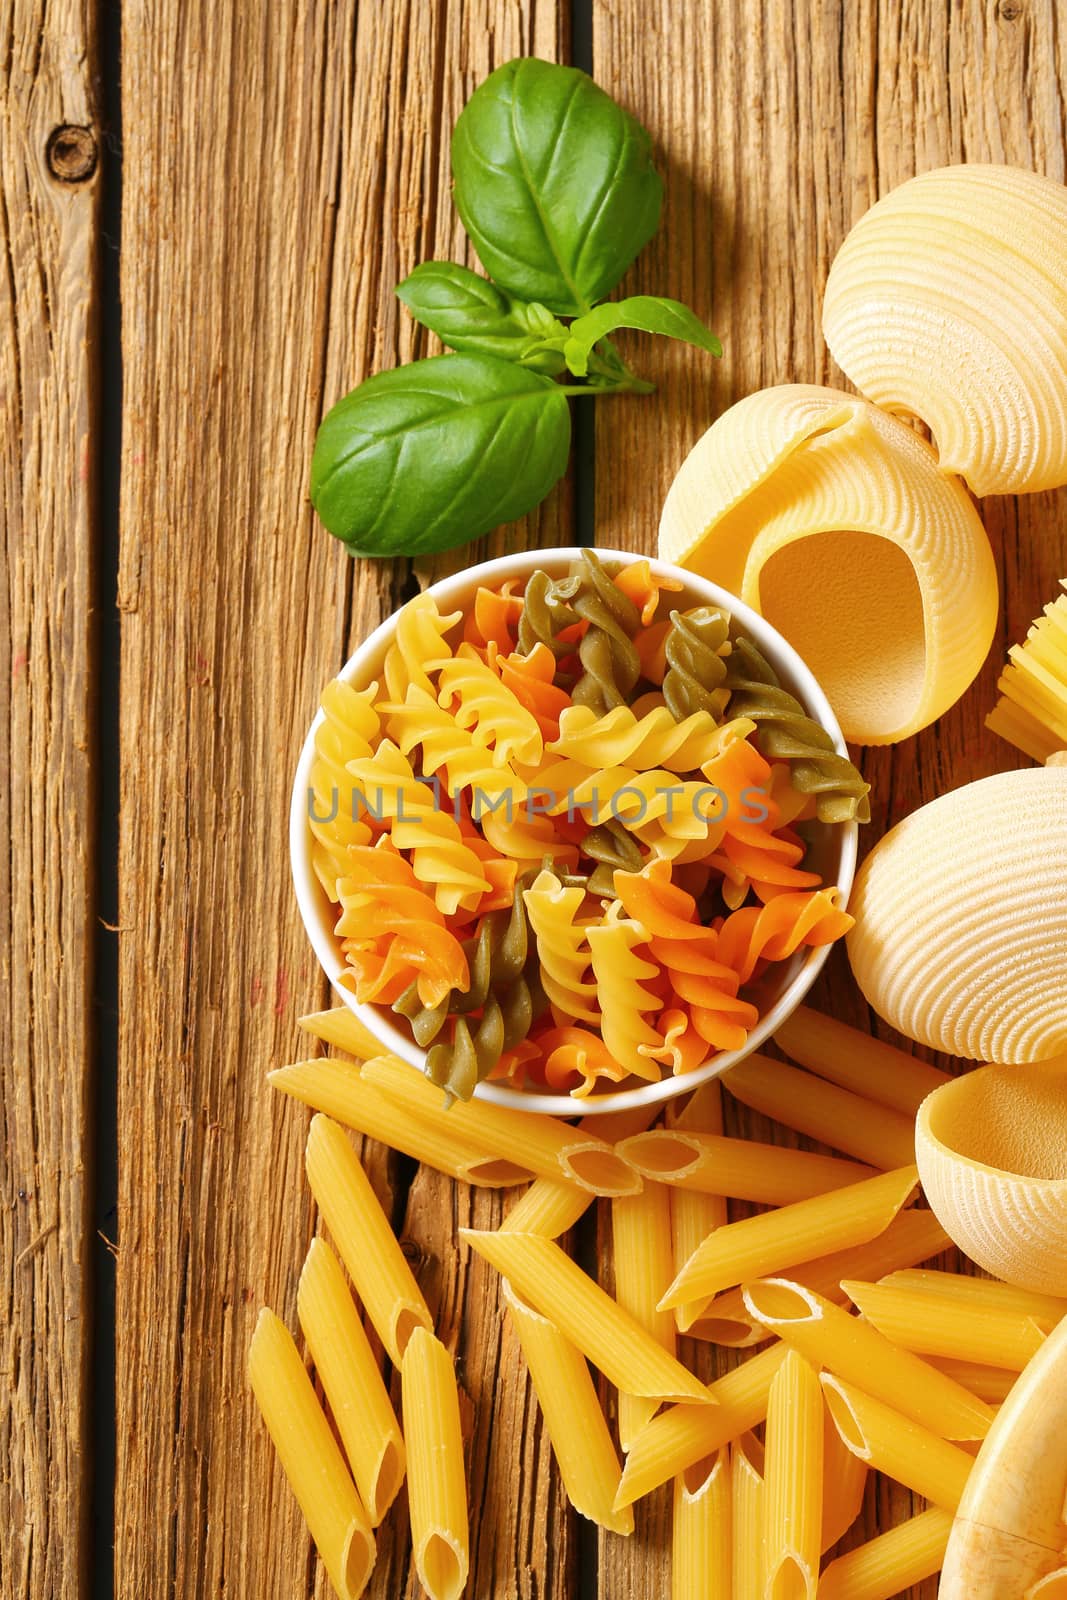 Various types of dried pasta on wooden background